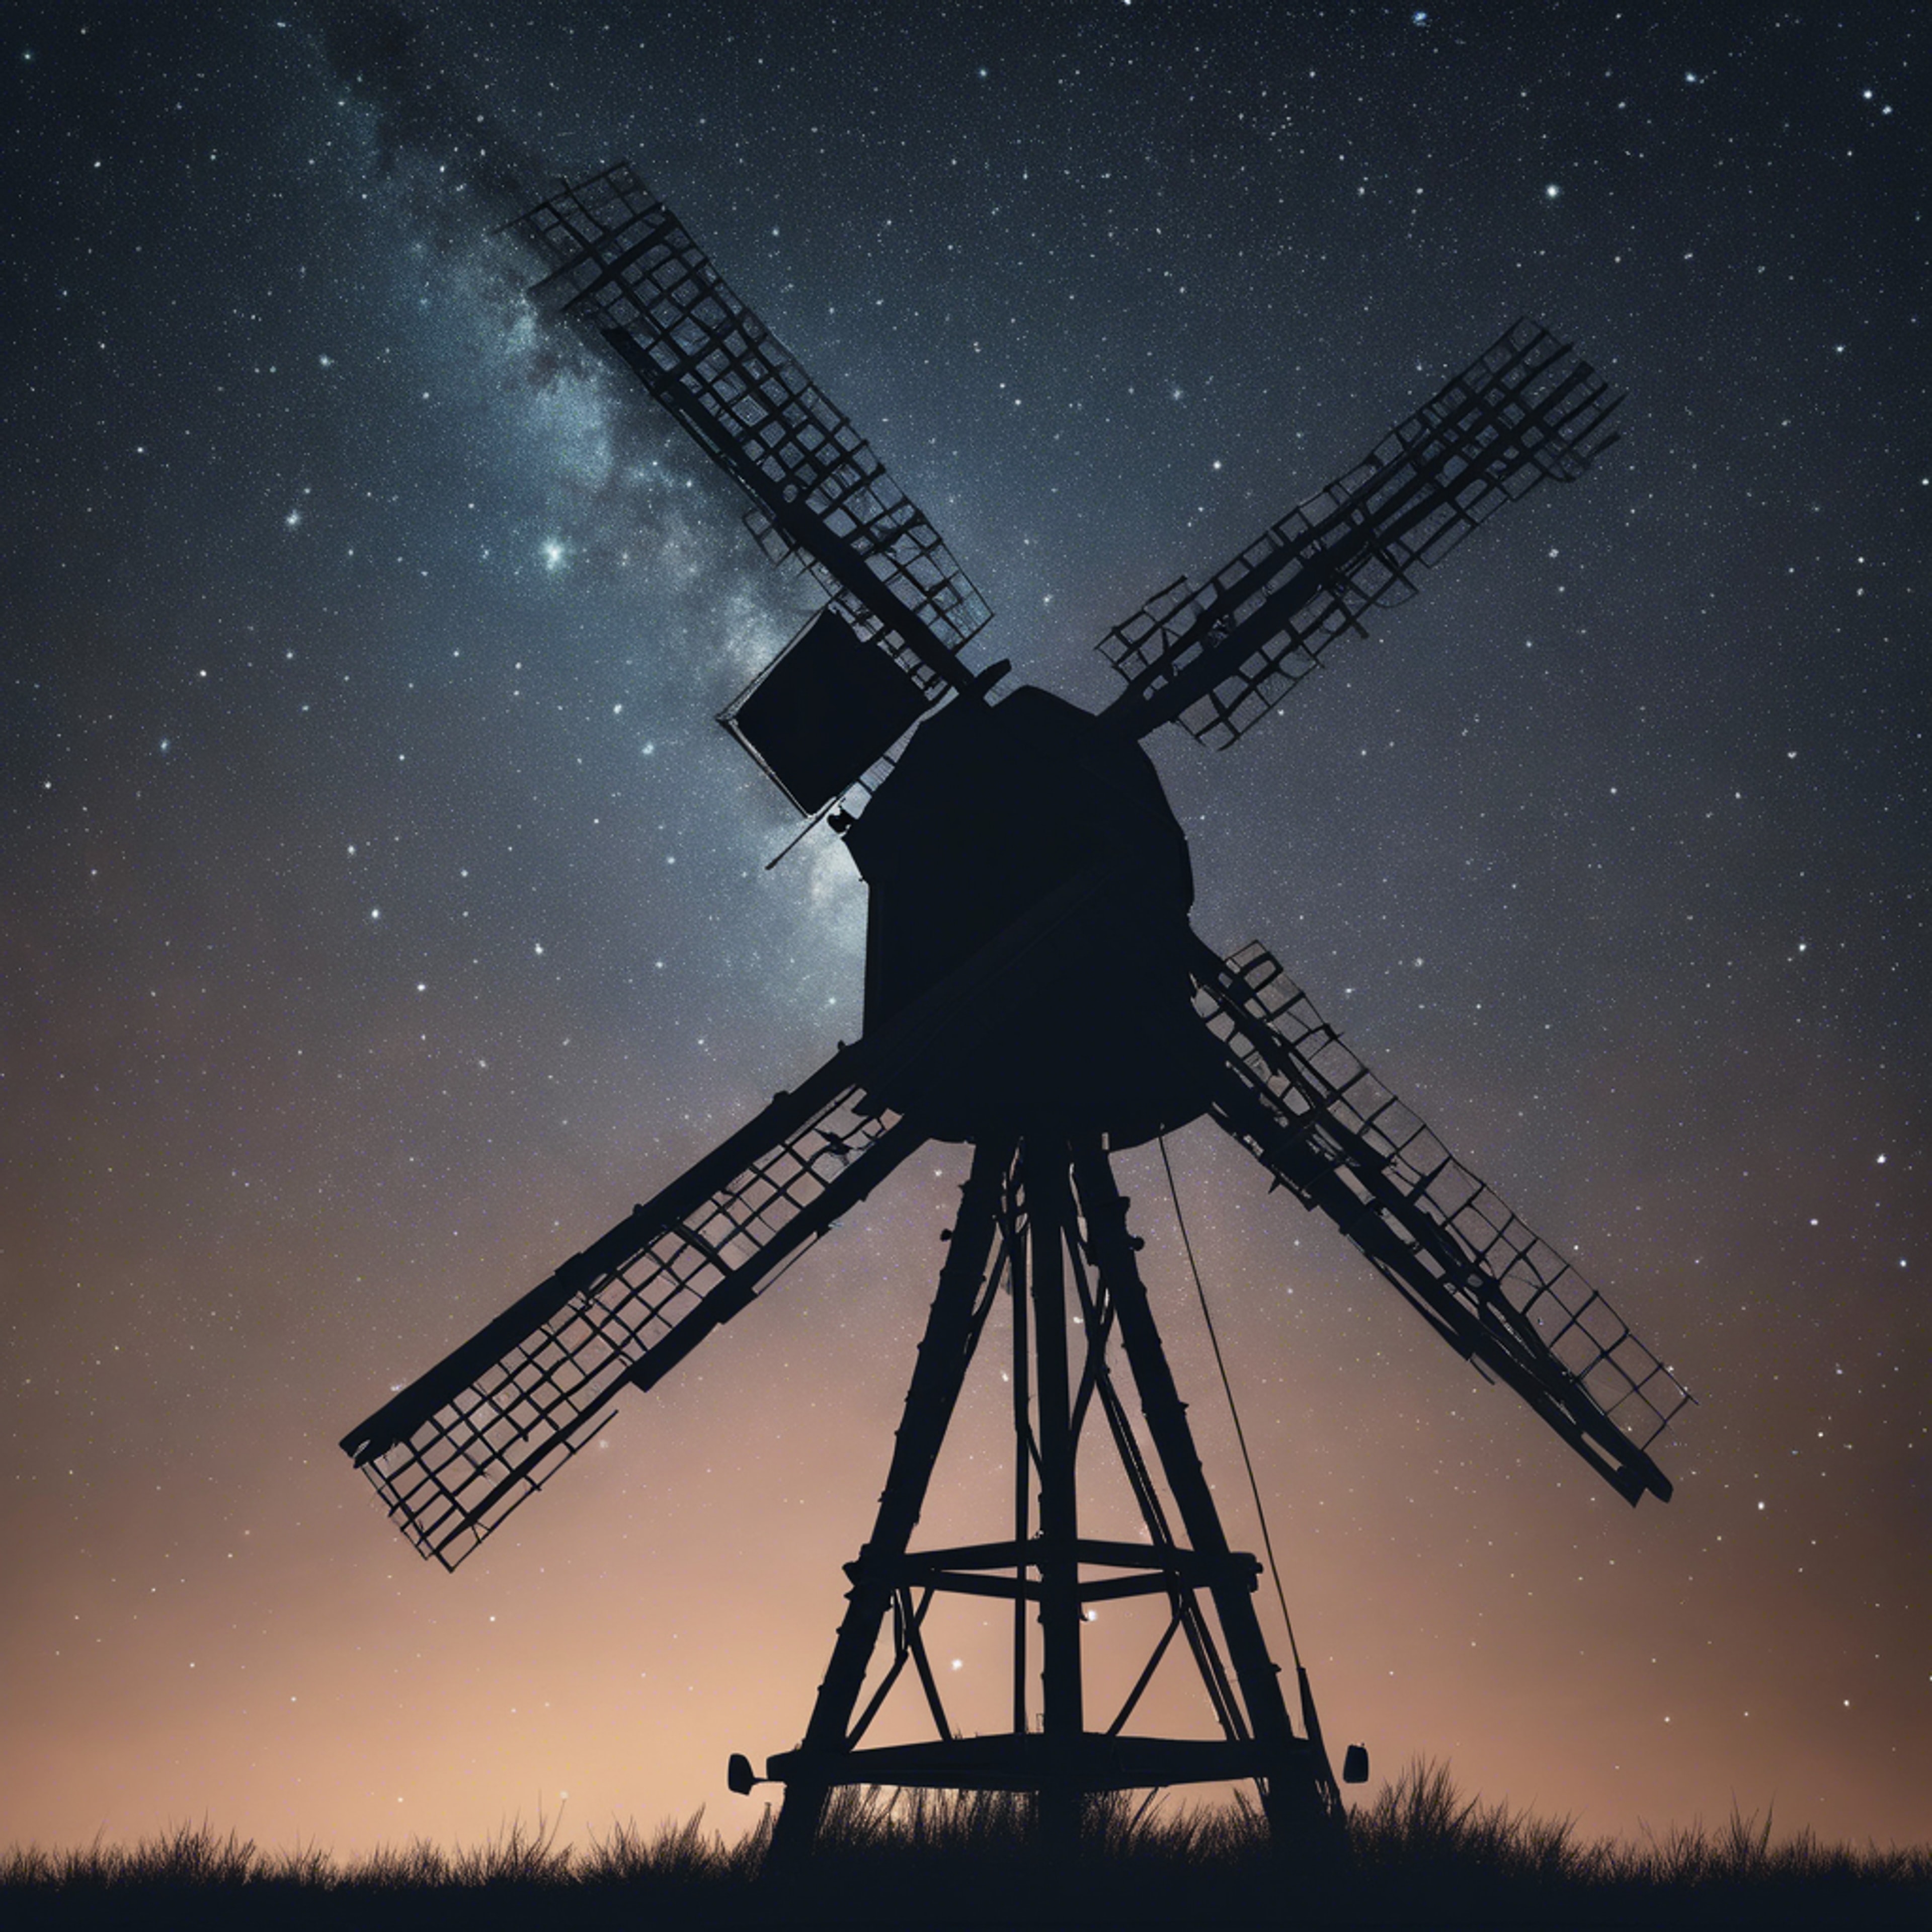 A silhouette of a traditional windmill against a mesmerizing starry night sky. ورق الجدران[d821762278f94928b618]